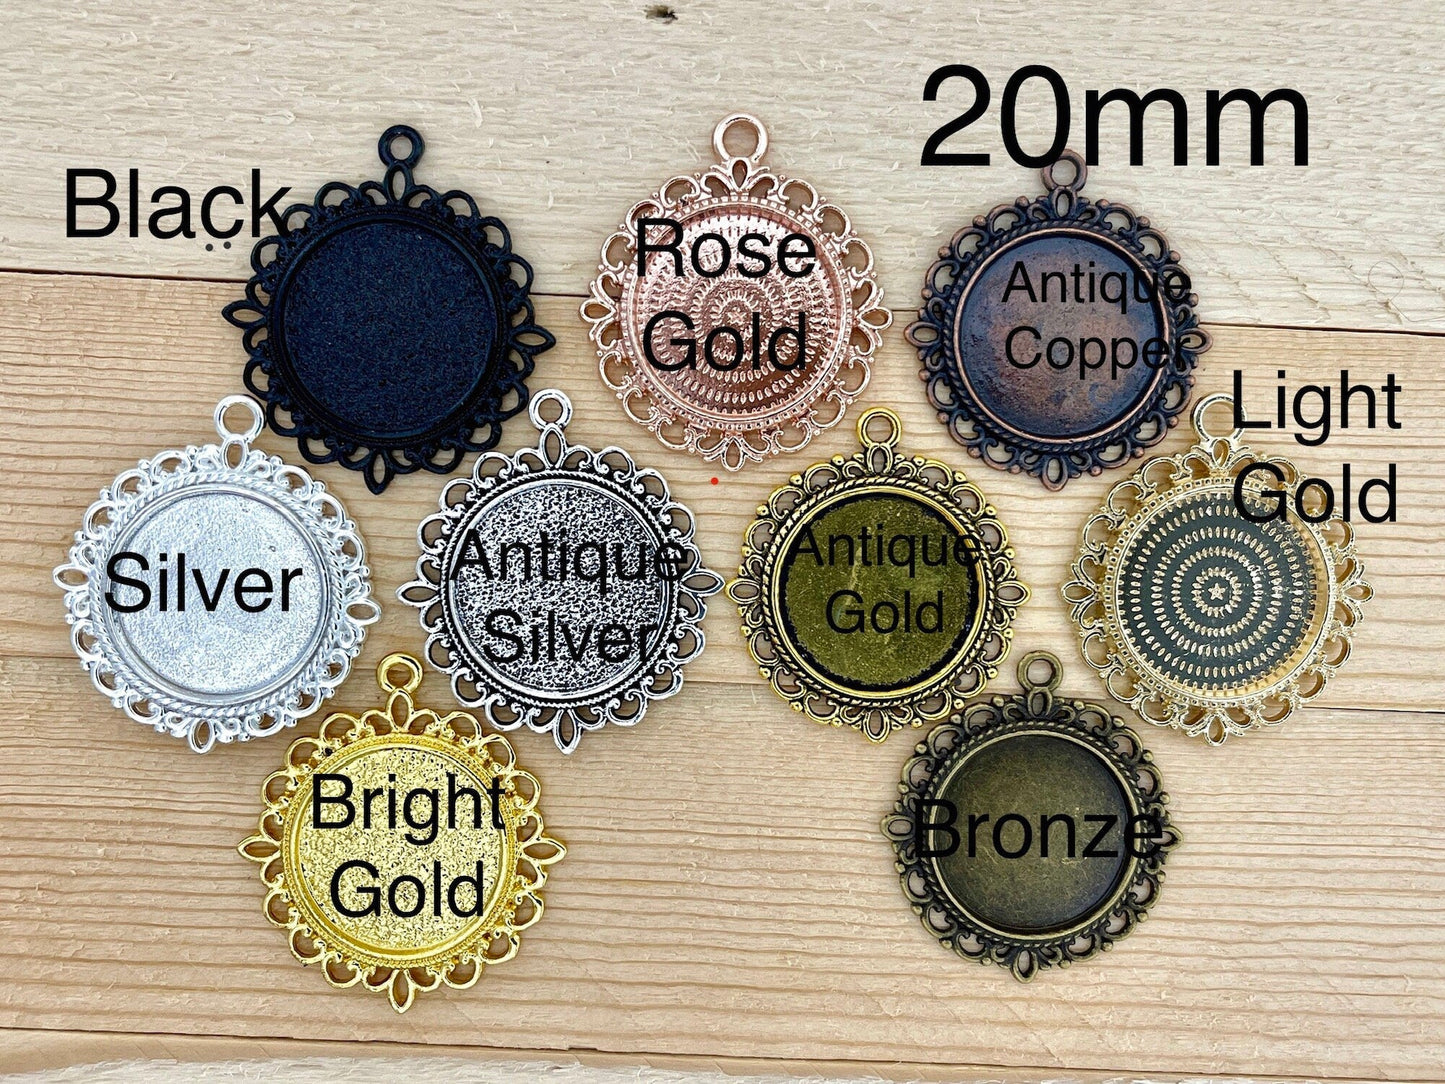 Wholesale Jewelry making Round Blank wedding photo Pendant Picture Frame Charms Antique (inside 20mm) Lead - Nickel Free